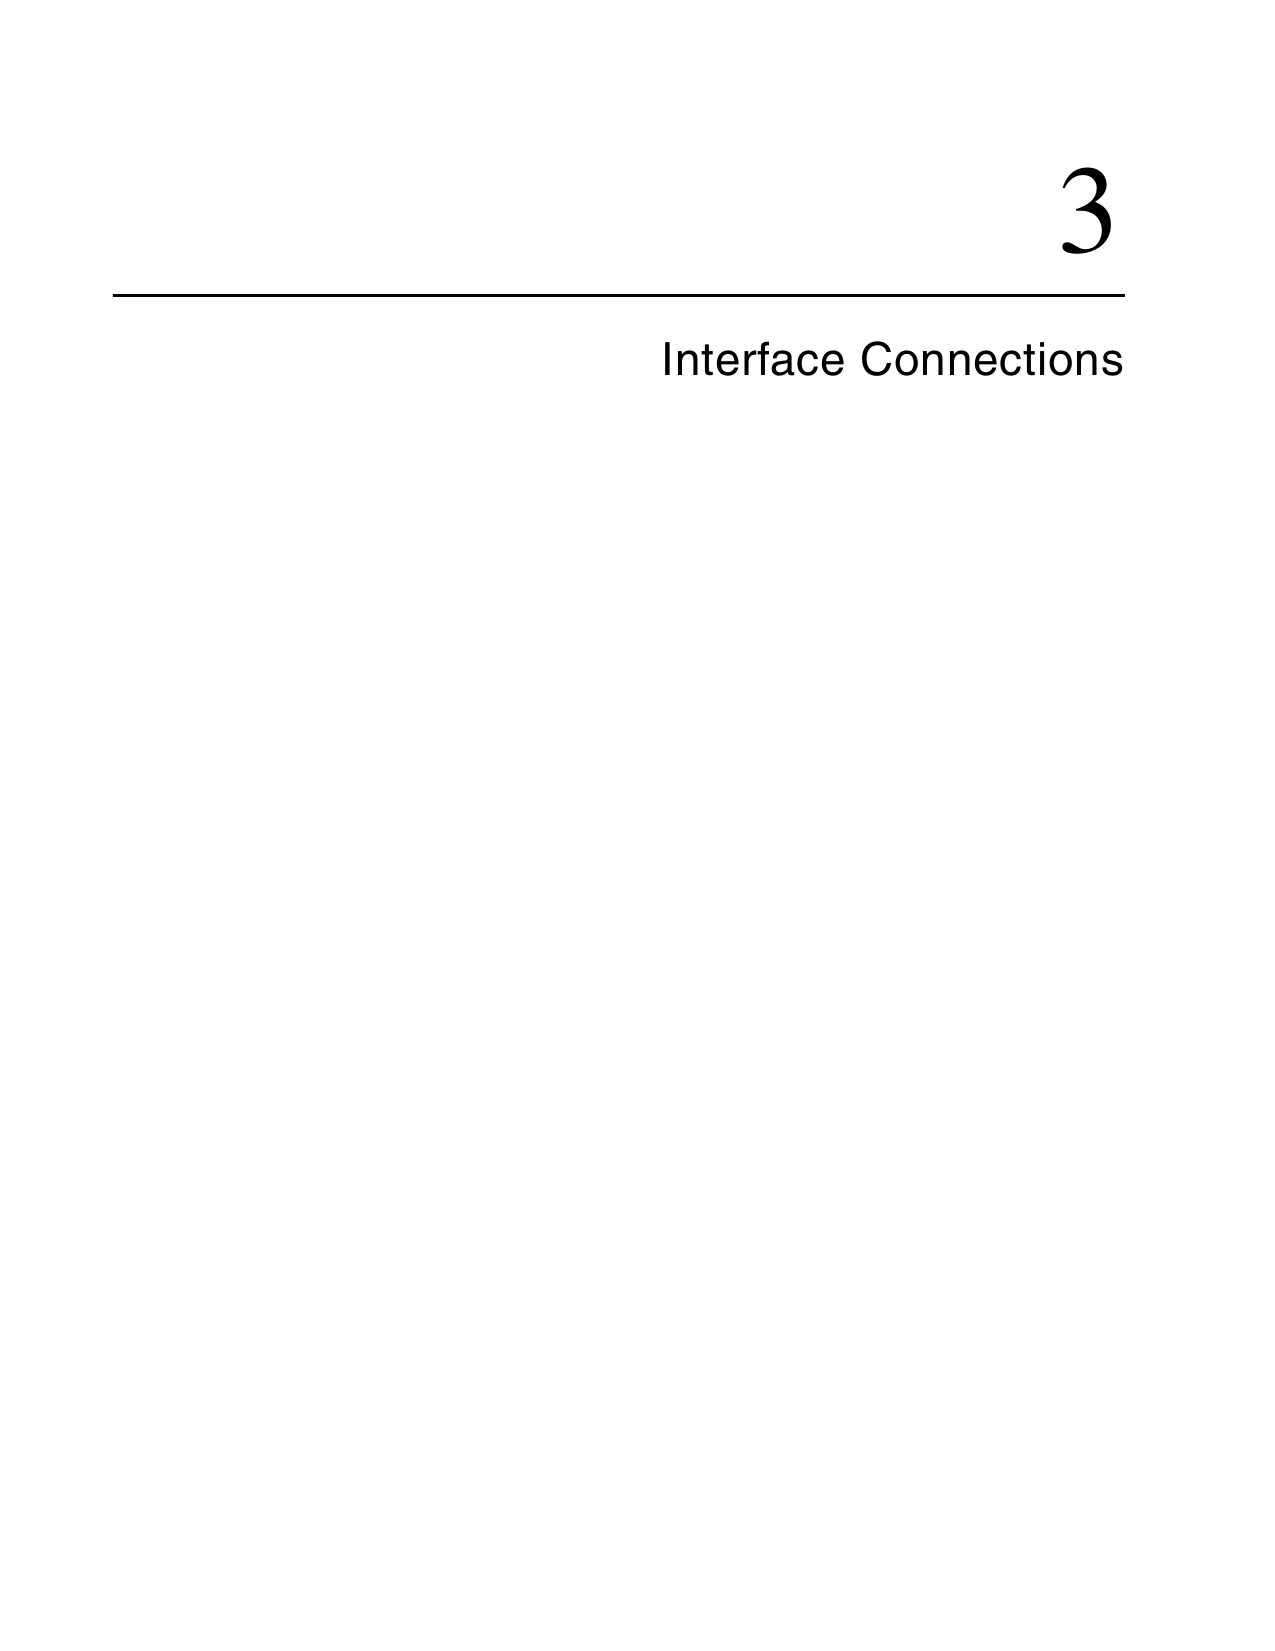 3Interface Connections